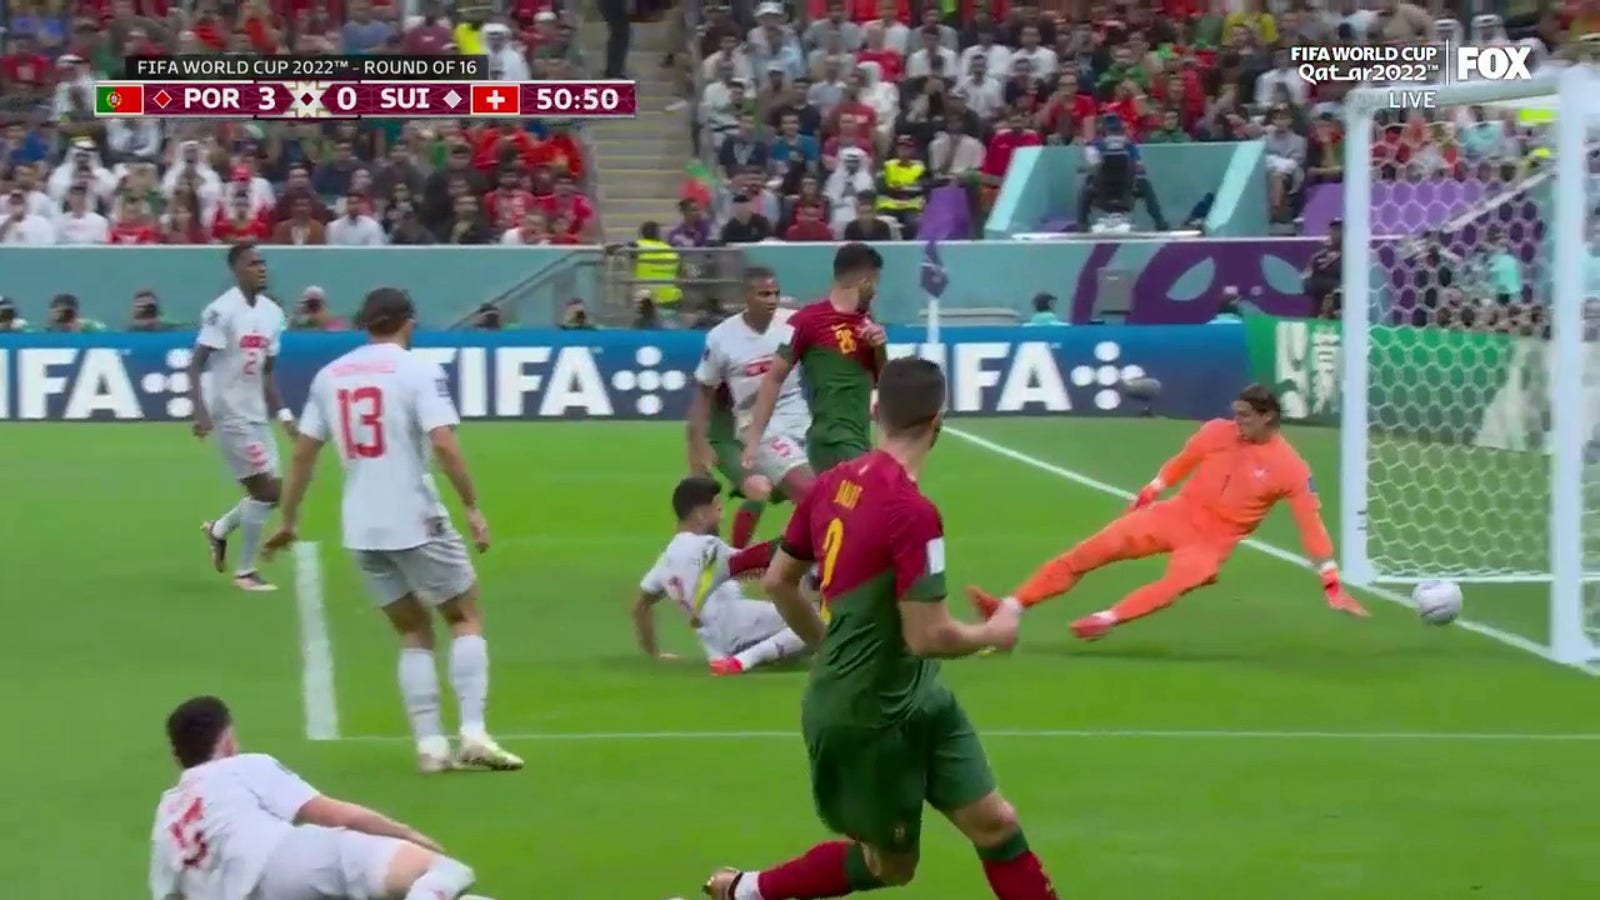 Portugal's Goncalo Ramos scores goal vs. Switzerland in 50'